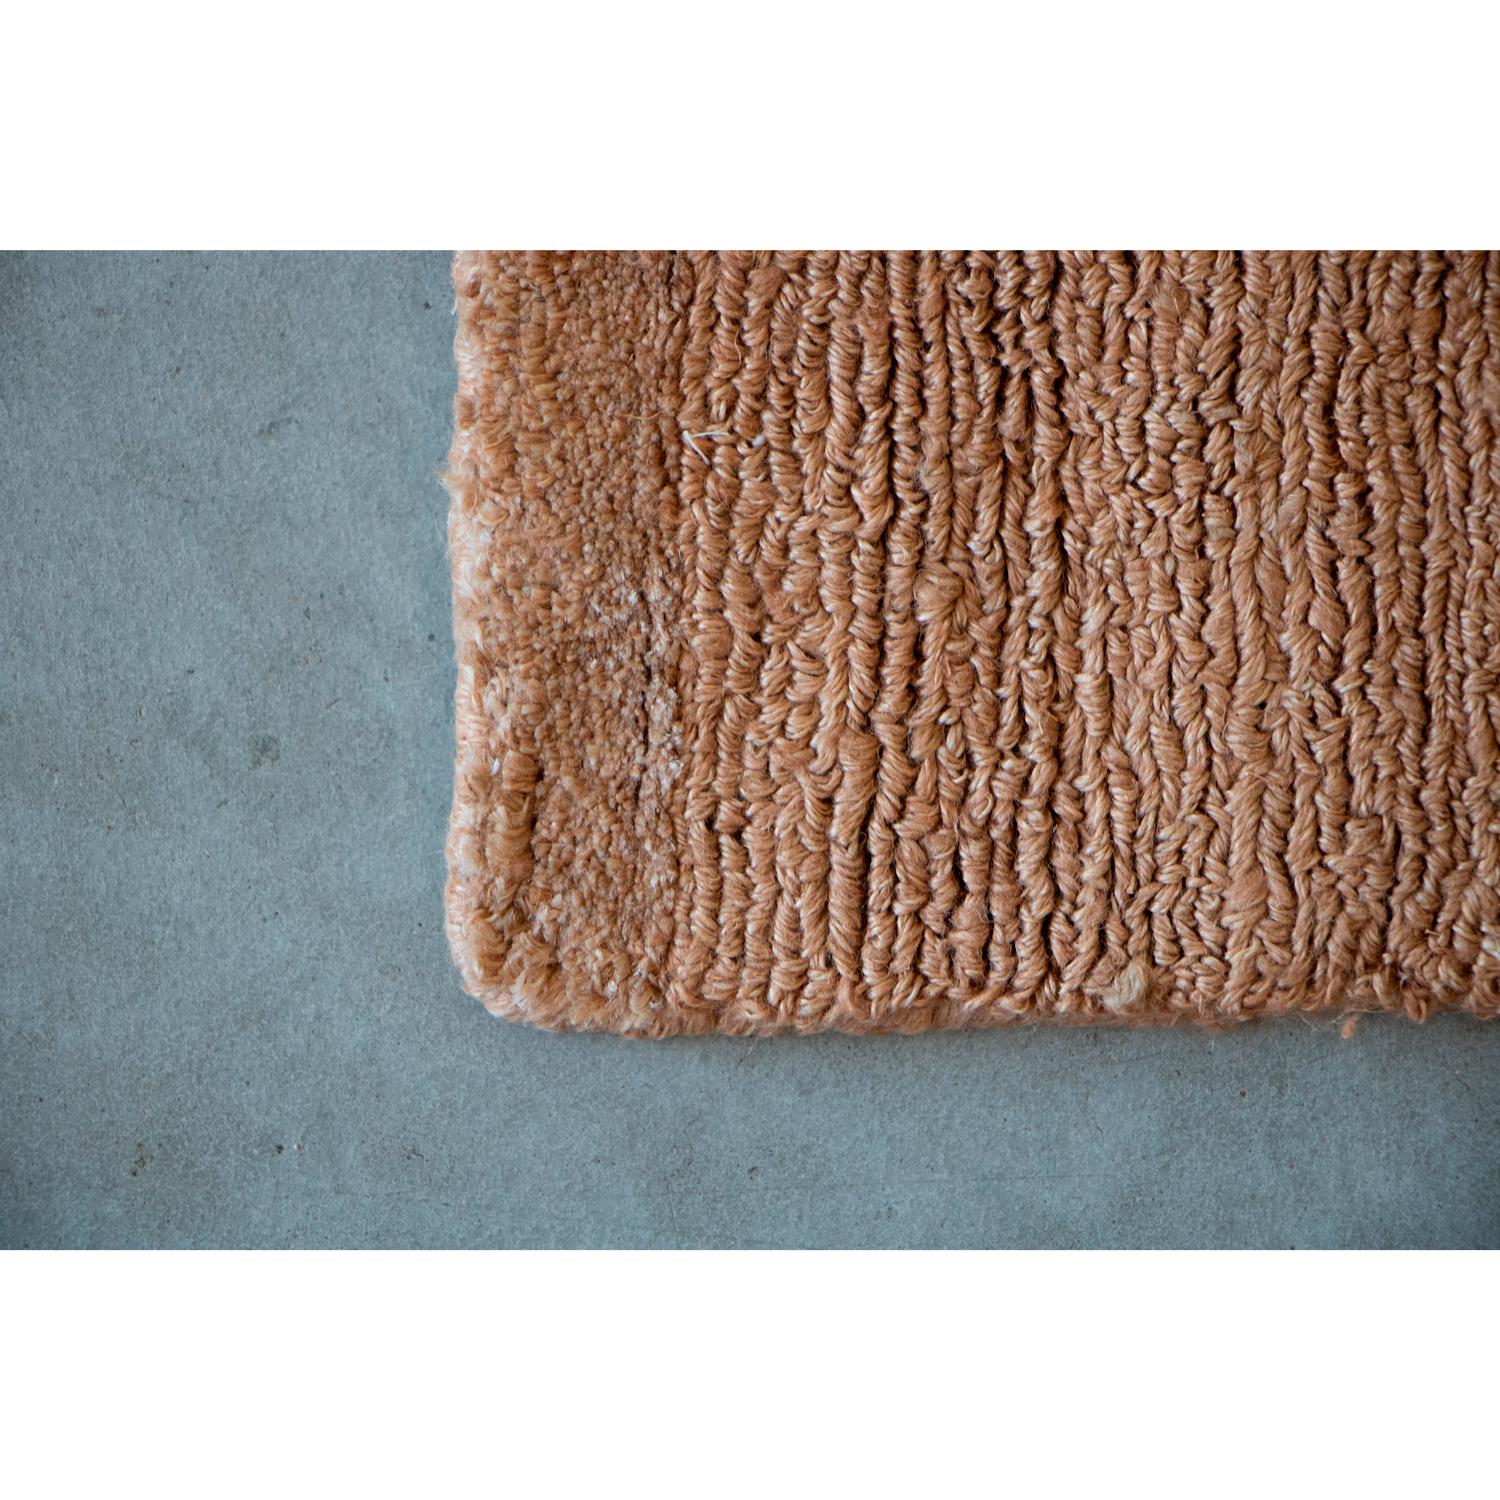 Hand-Woven 21st Century Neutral Tones Natural Linen Rug by Deanna Comellini 150x250 cm For Sale